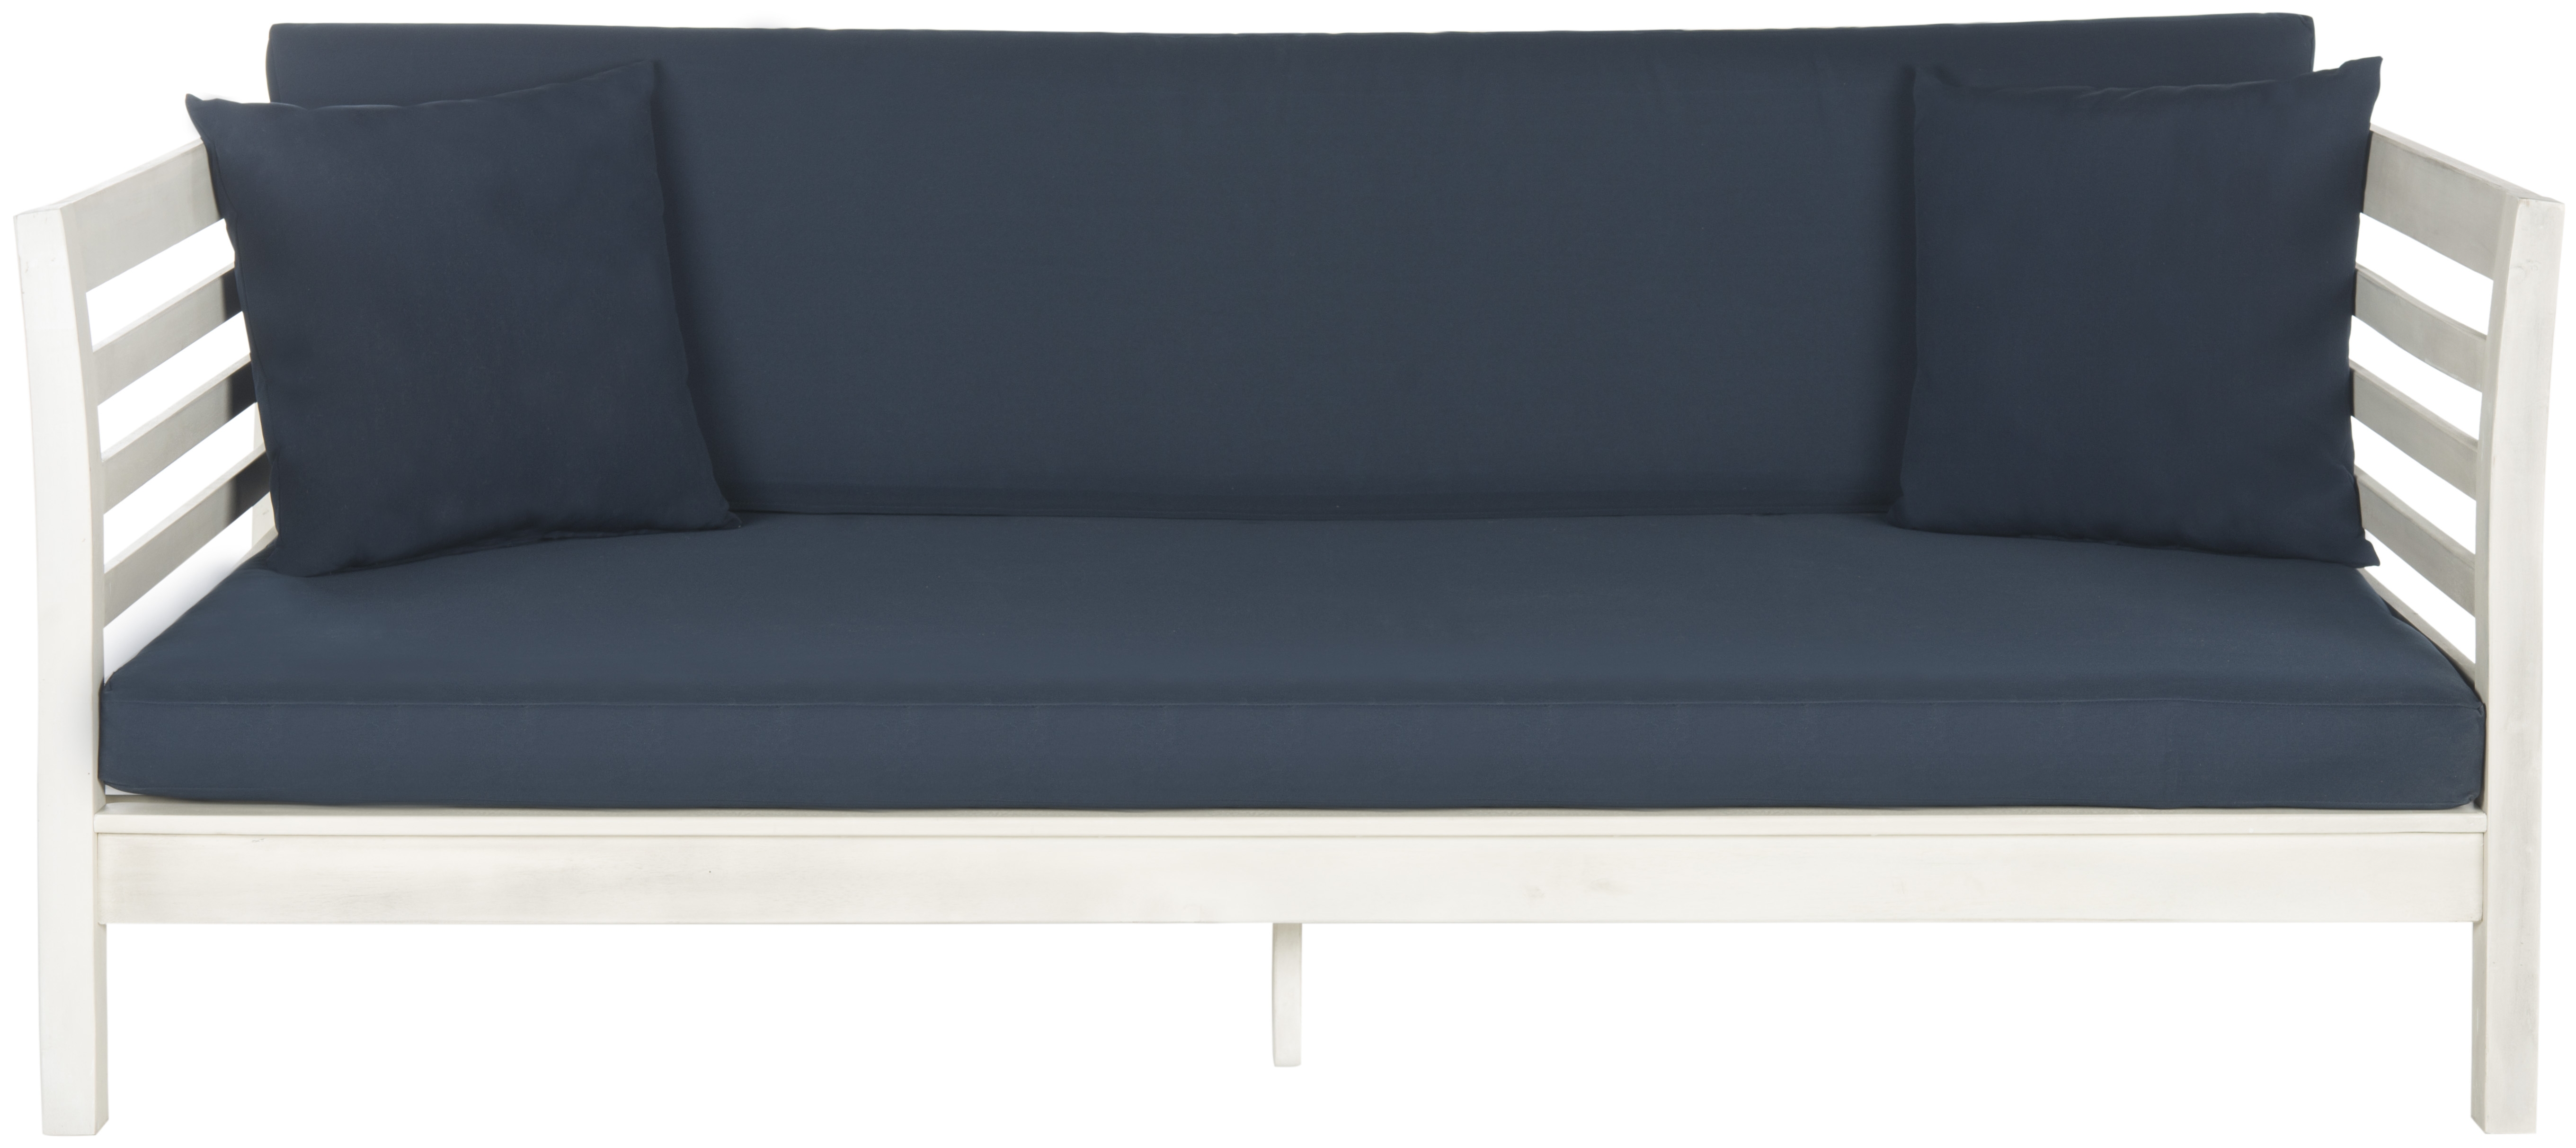 Malibu Daybed - Antique White/Navy - Arlo Home - Image 0